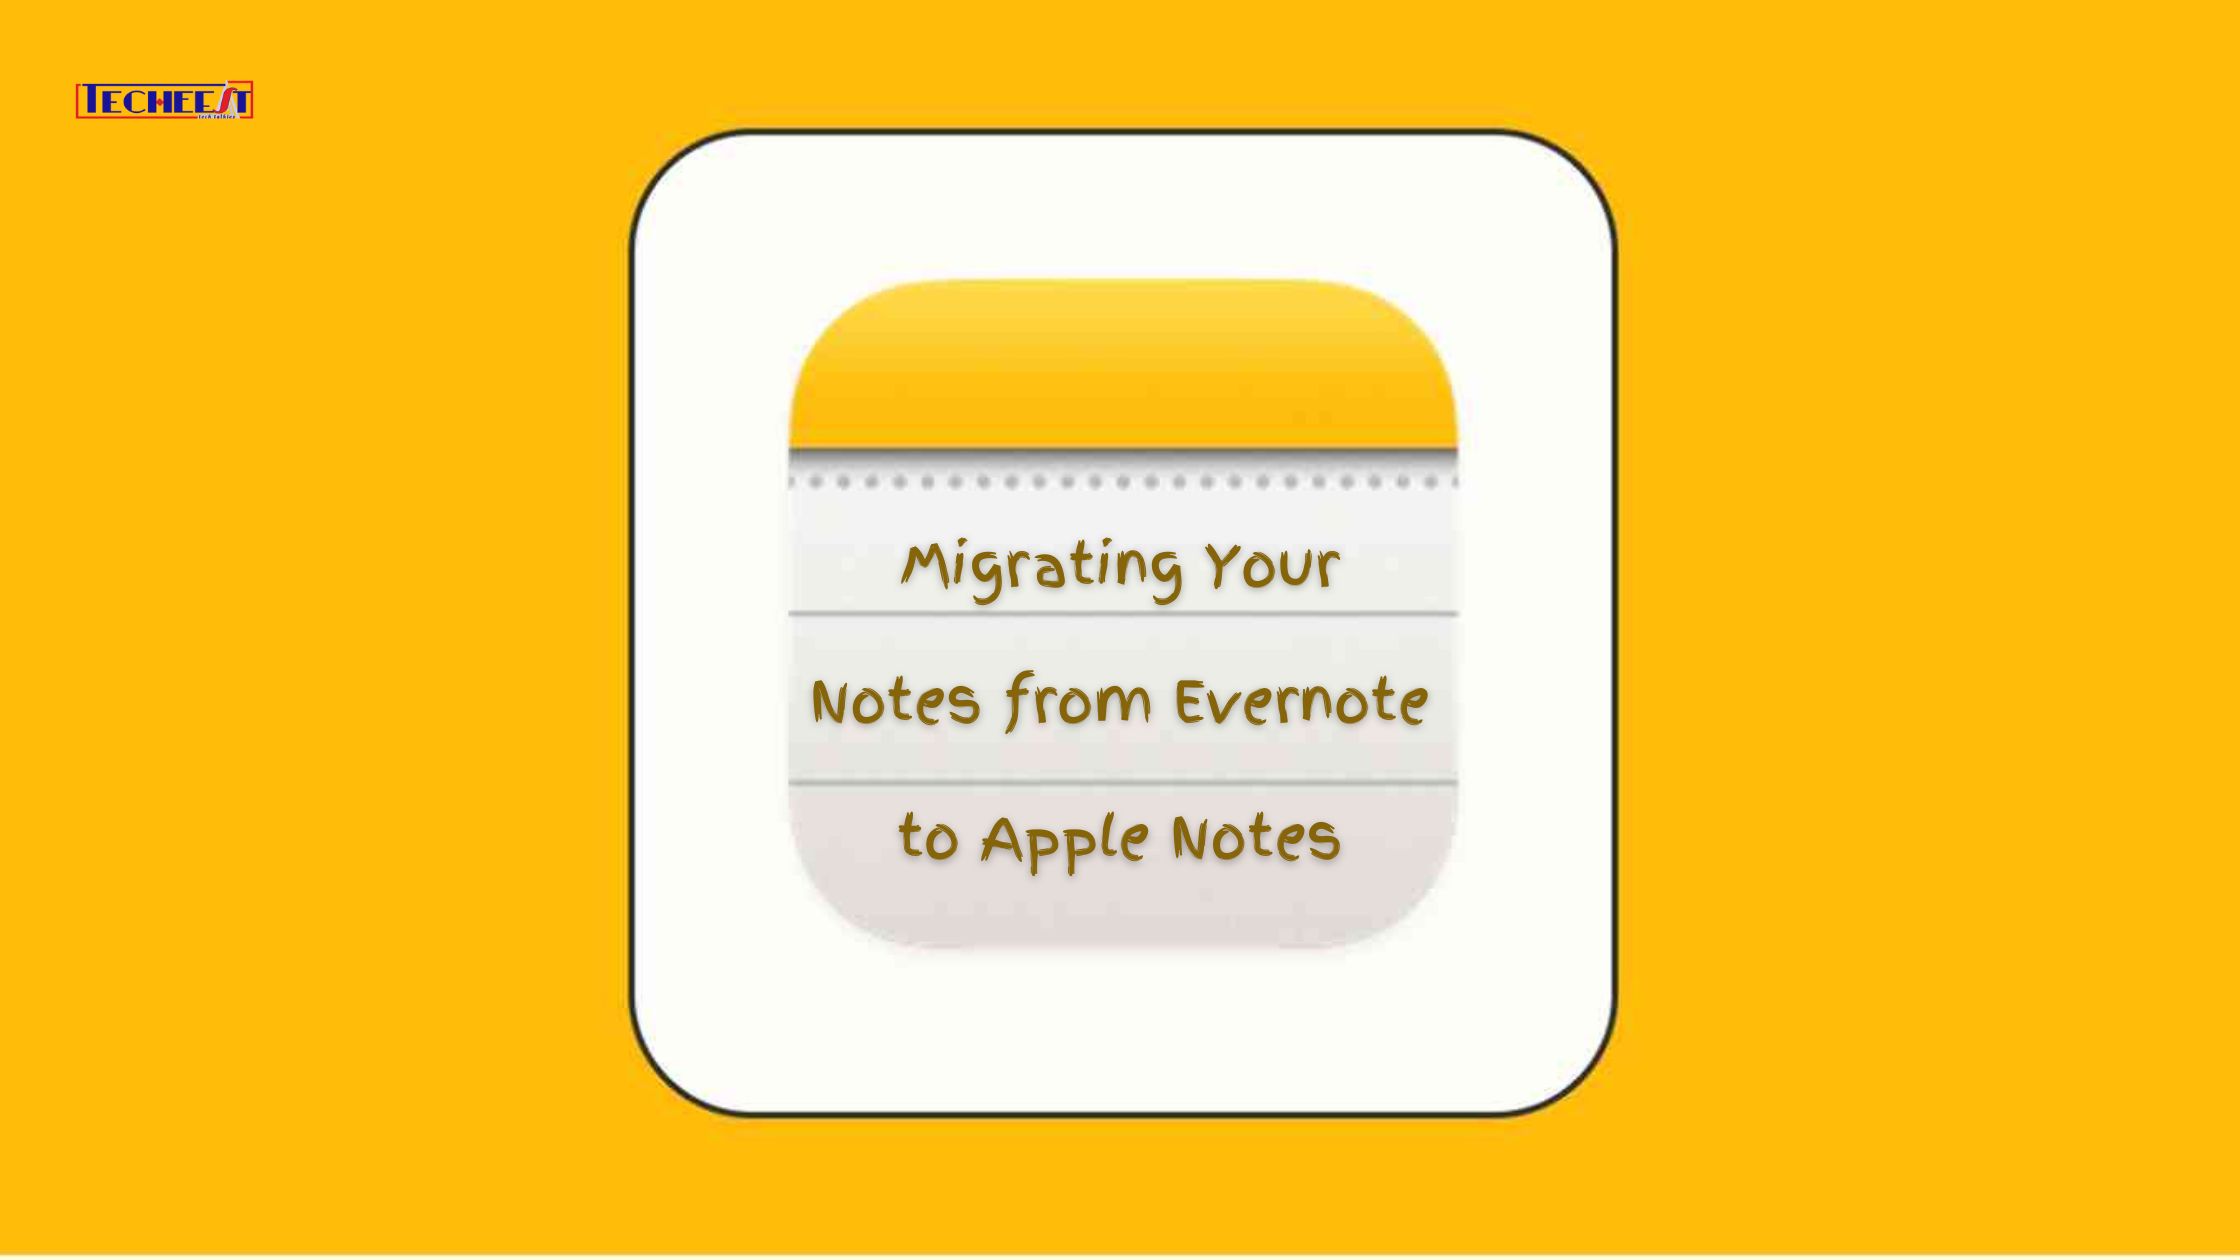 Migrating Your Notes from Evernote to Apple Notes